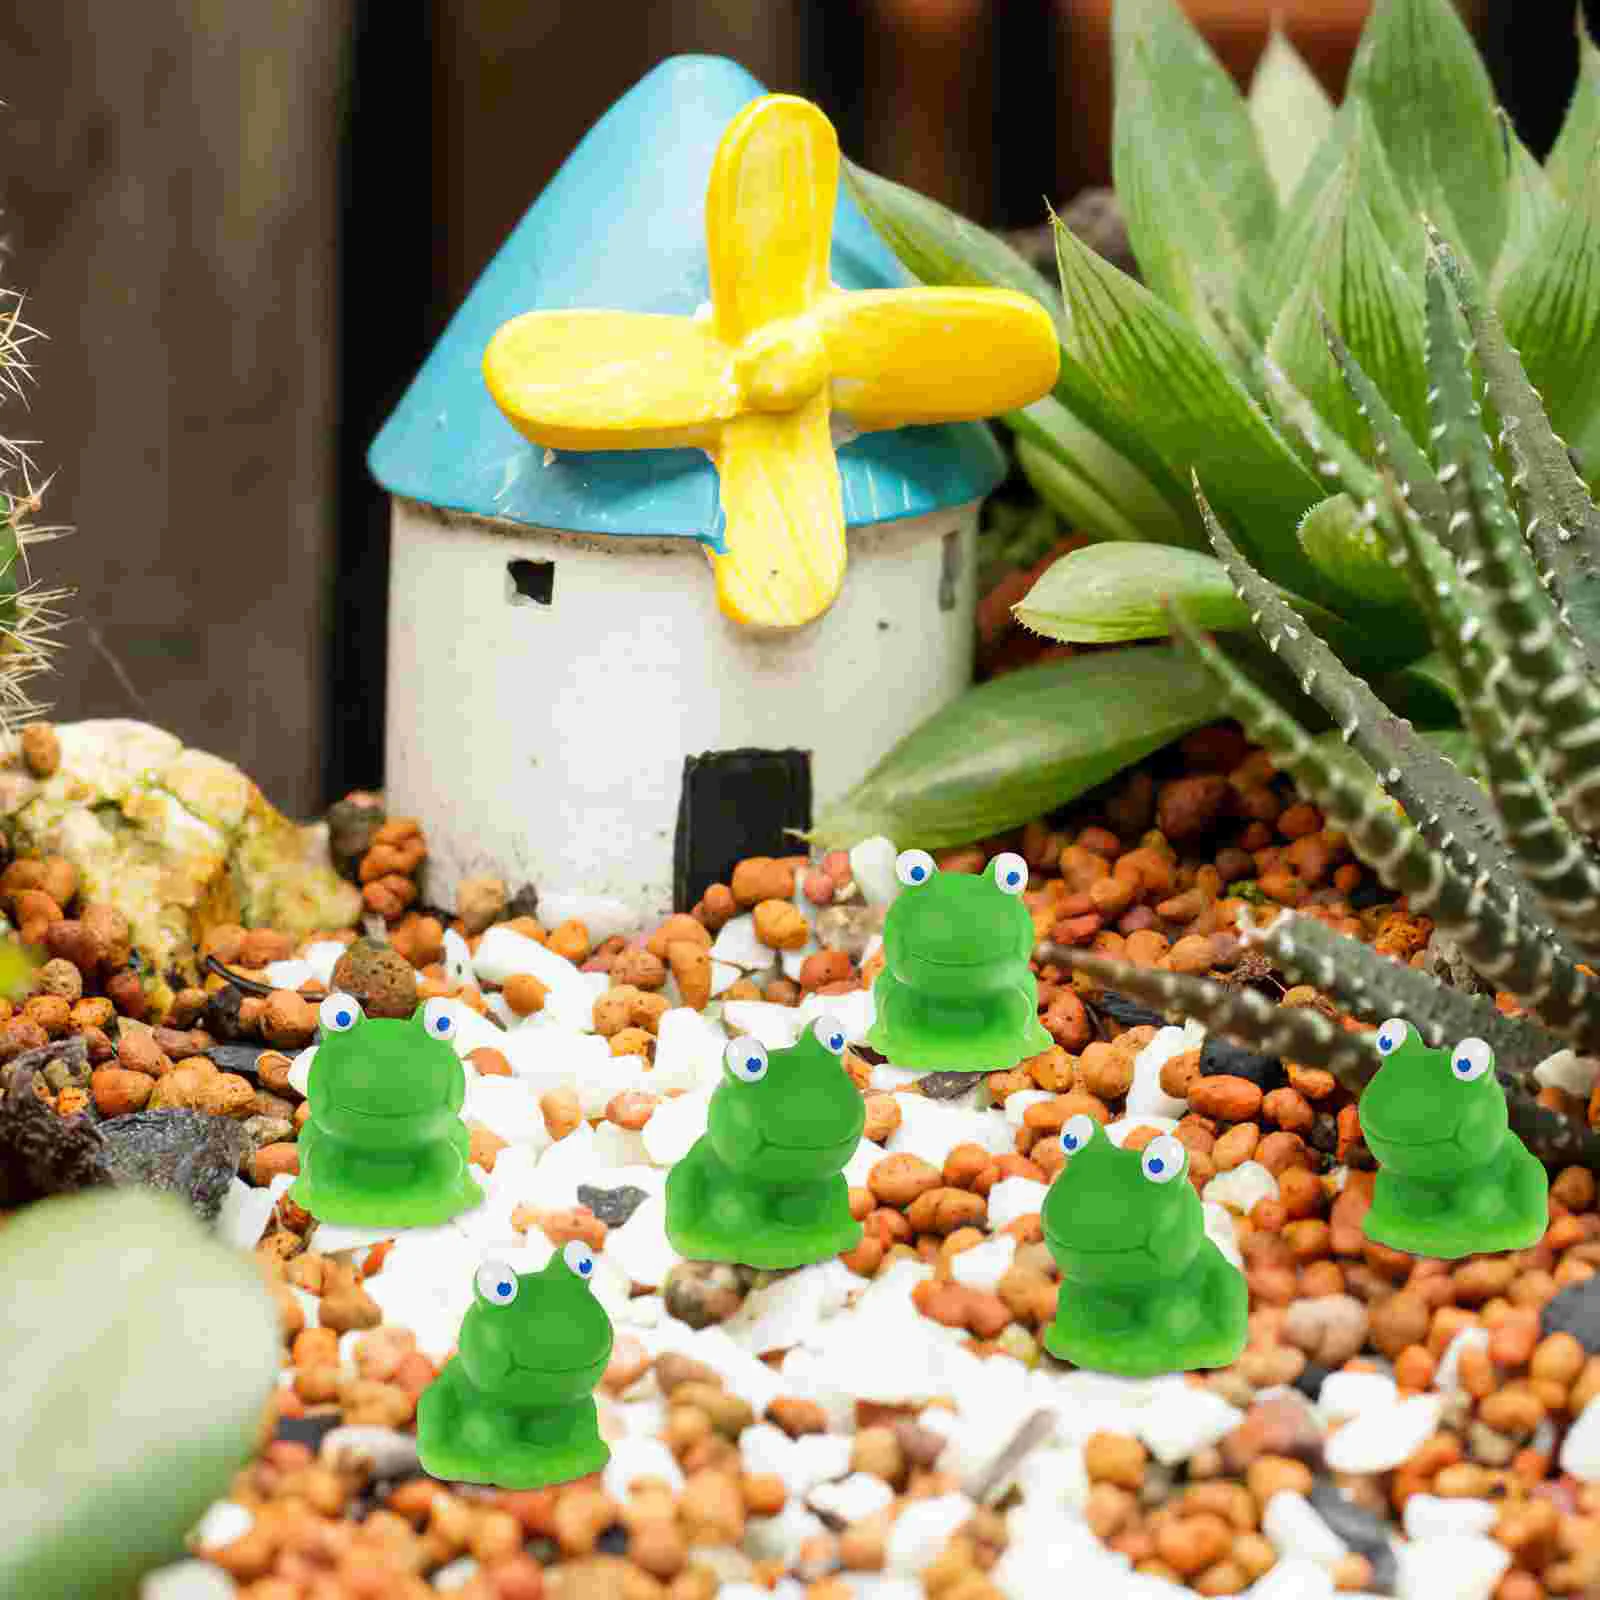 Resin Mini Frogs 100 Pack Figurines, Green Little Small Miniature Plastic  Tiny Frogs Bulk to Hide for Garden Leap Year Decorations (Bag of 100 pcs)